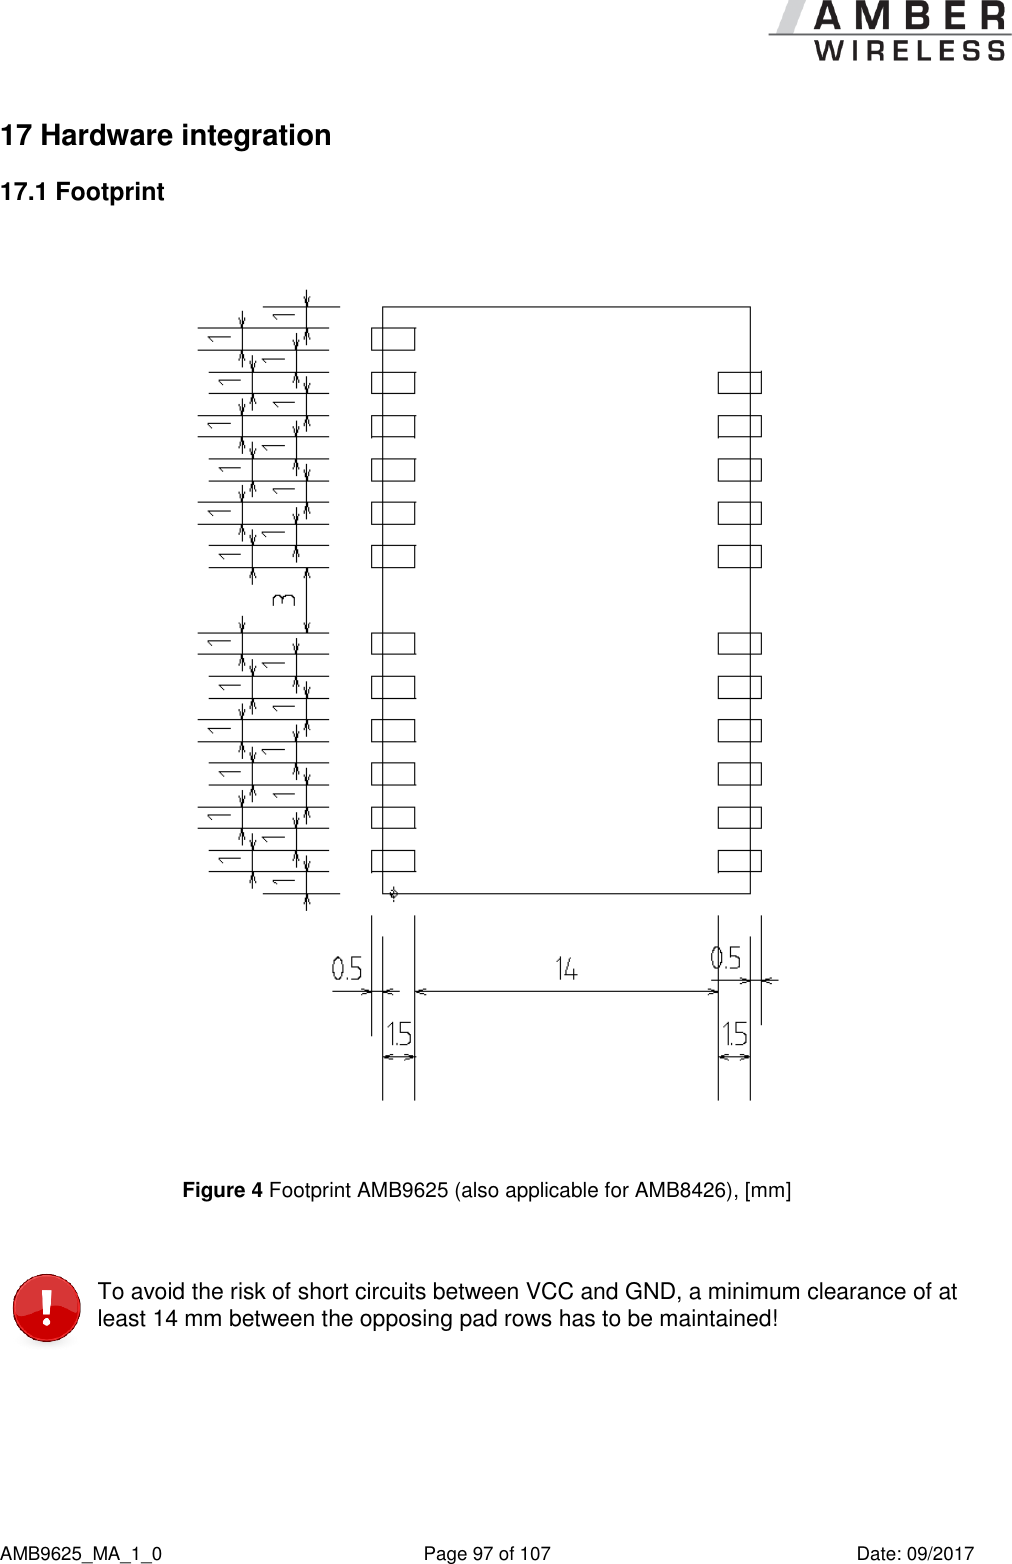      AMB9625_MA_1_0  Page 97 of 107  Date: 09/2017 17 Hardware integration 17.1 Footprint  Figure 4 Footprint AMB9625 (also applicable for AMB8426), [mm]   To avoid the risk of short circuits between VCC and GND, a minimum clearance of at least 14 mm between the opposing pad rows has to be maintained!  